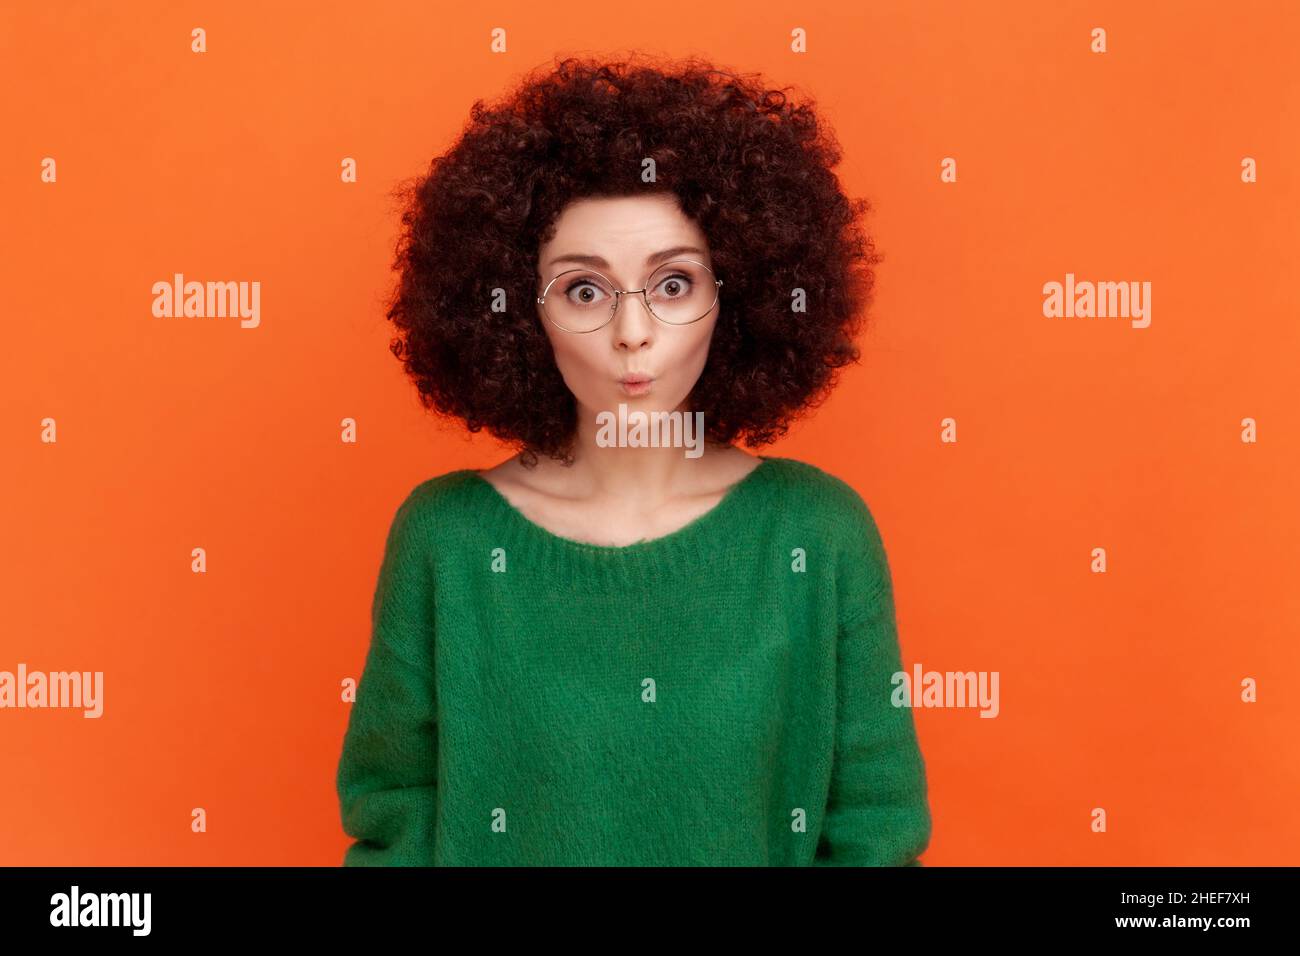 Portrait of funny woman with Afro hairstyle wearing green casual style sweater and eyeglasses, standing with pout lips, looking at camera. Indoor studio shot isolated on orange background. Stock Photo